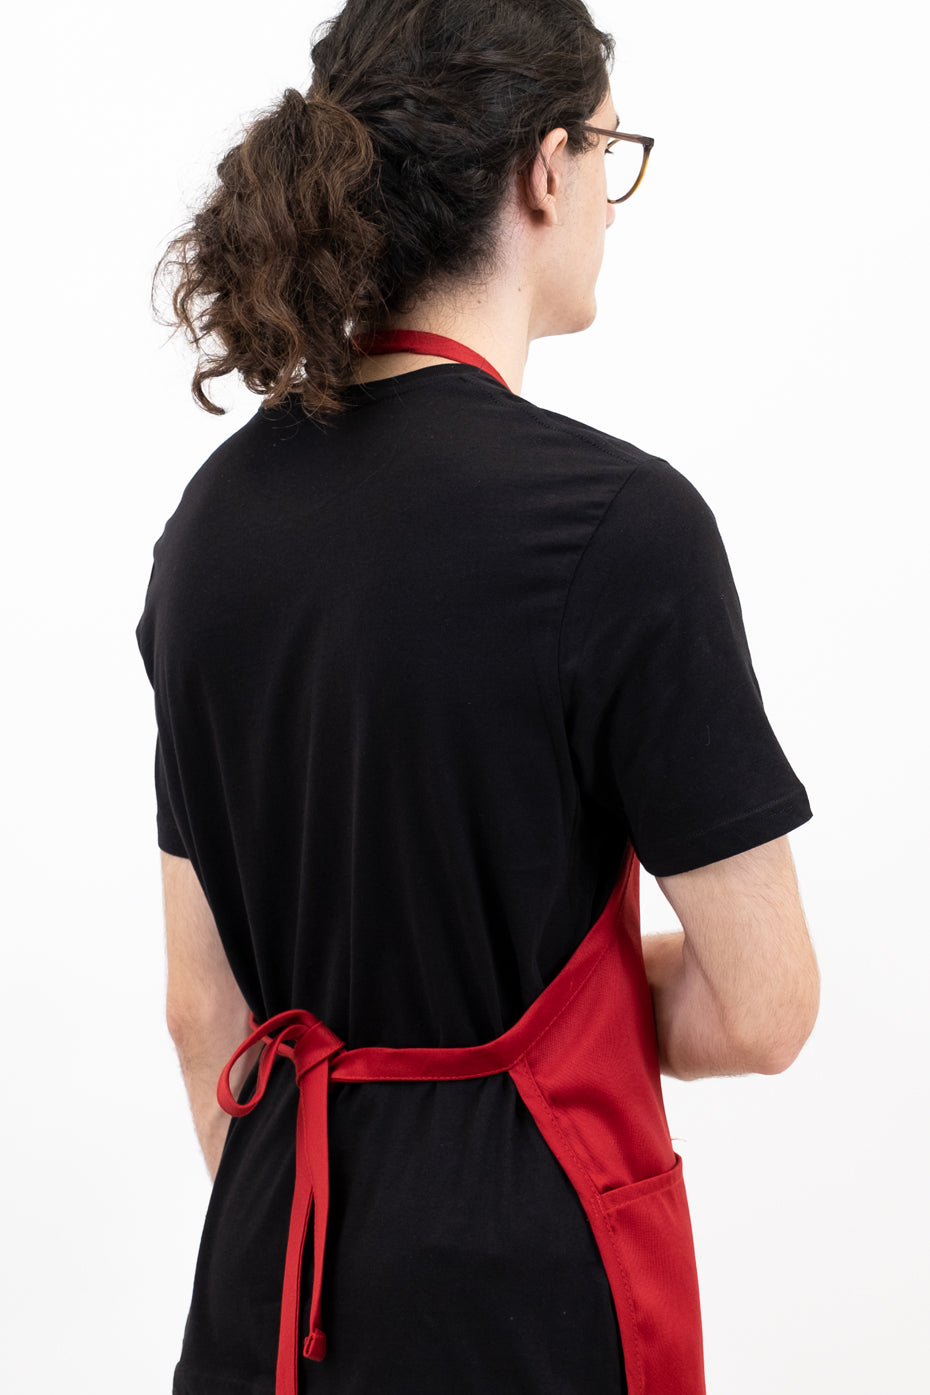 Laviva Sports™ Full Length Apron with 2 Patch Pockets